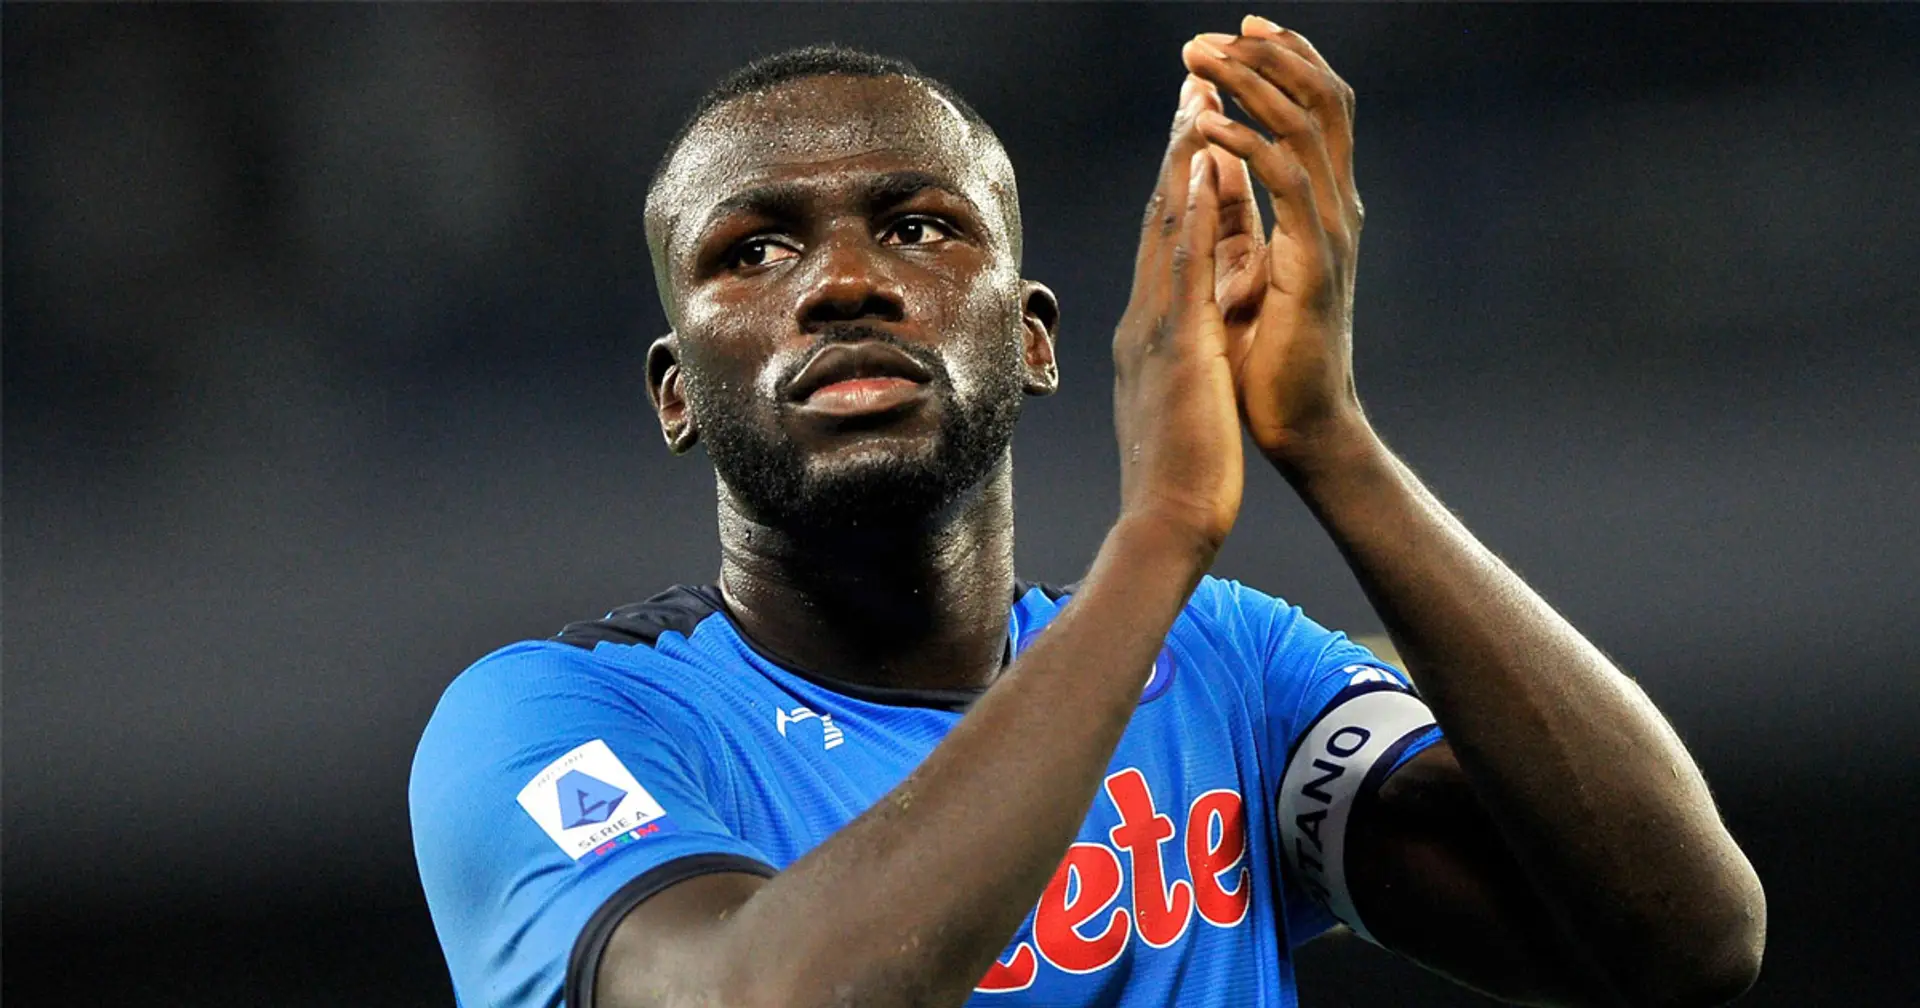 Koulibaly: Real Madrid is one of the 3 teams I would join if I left Napoli